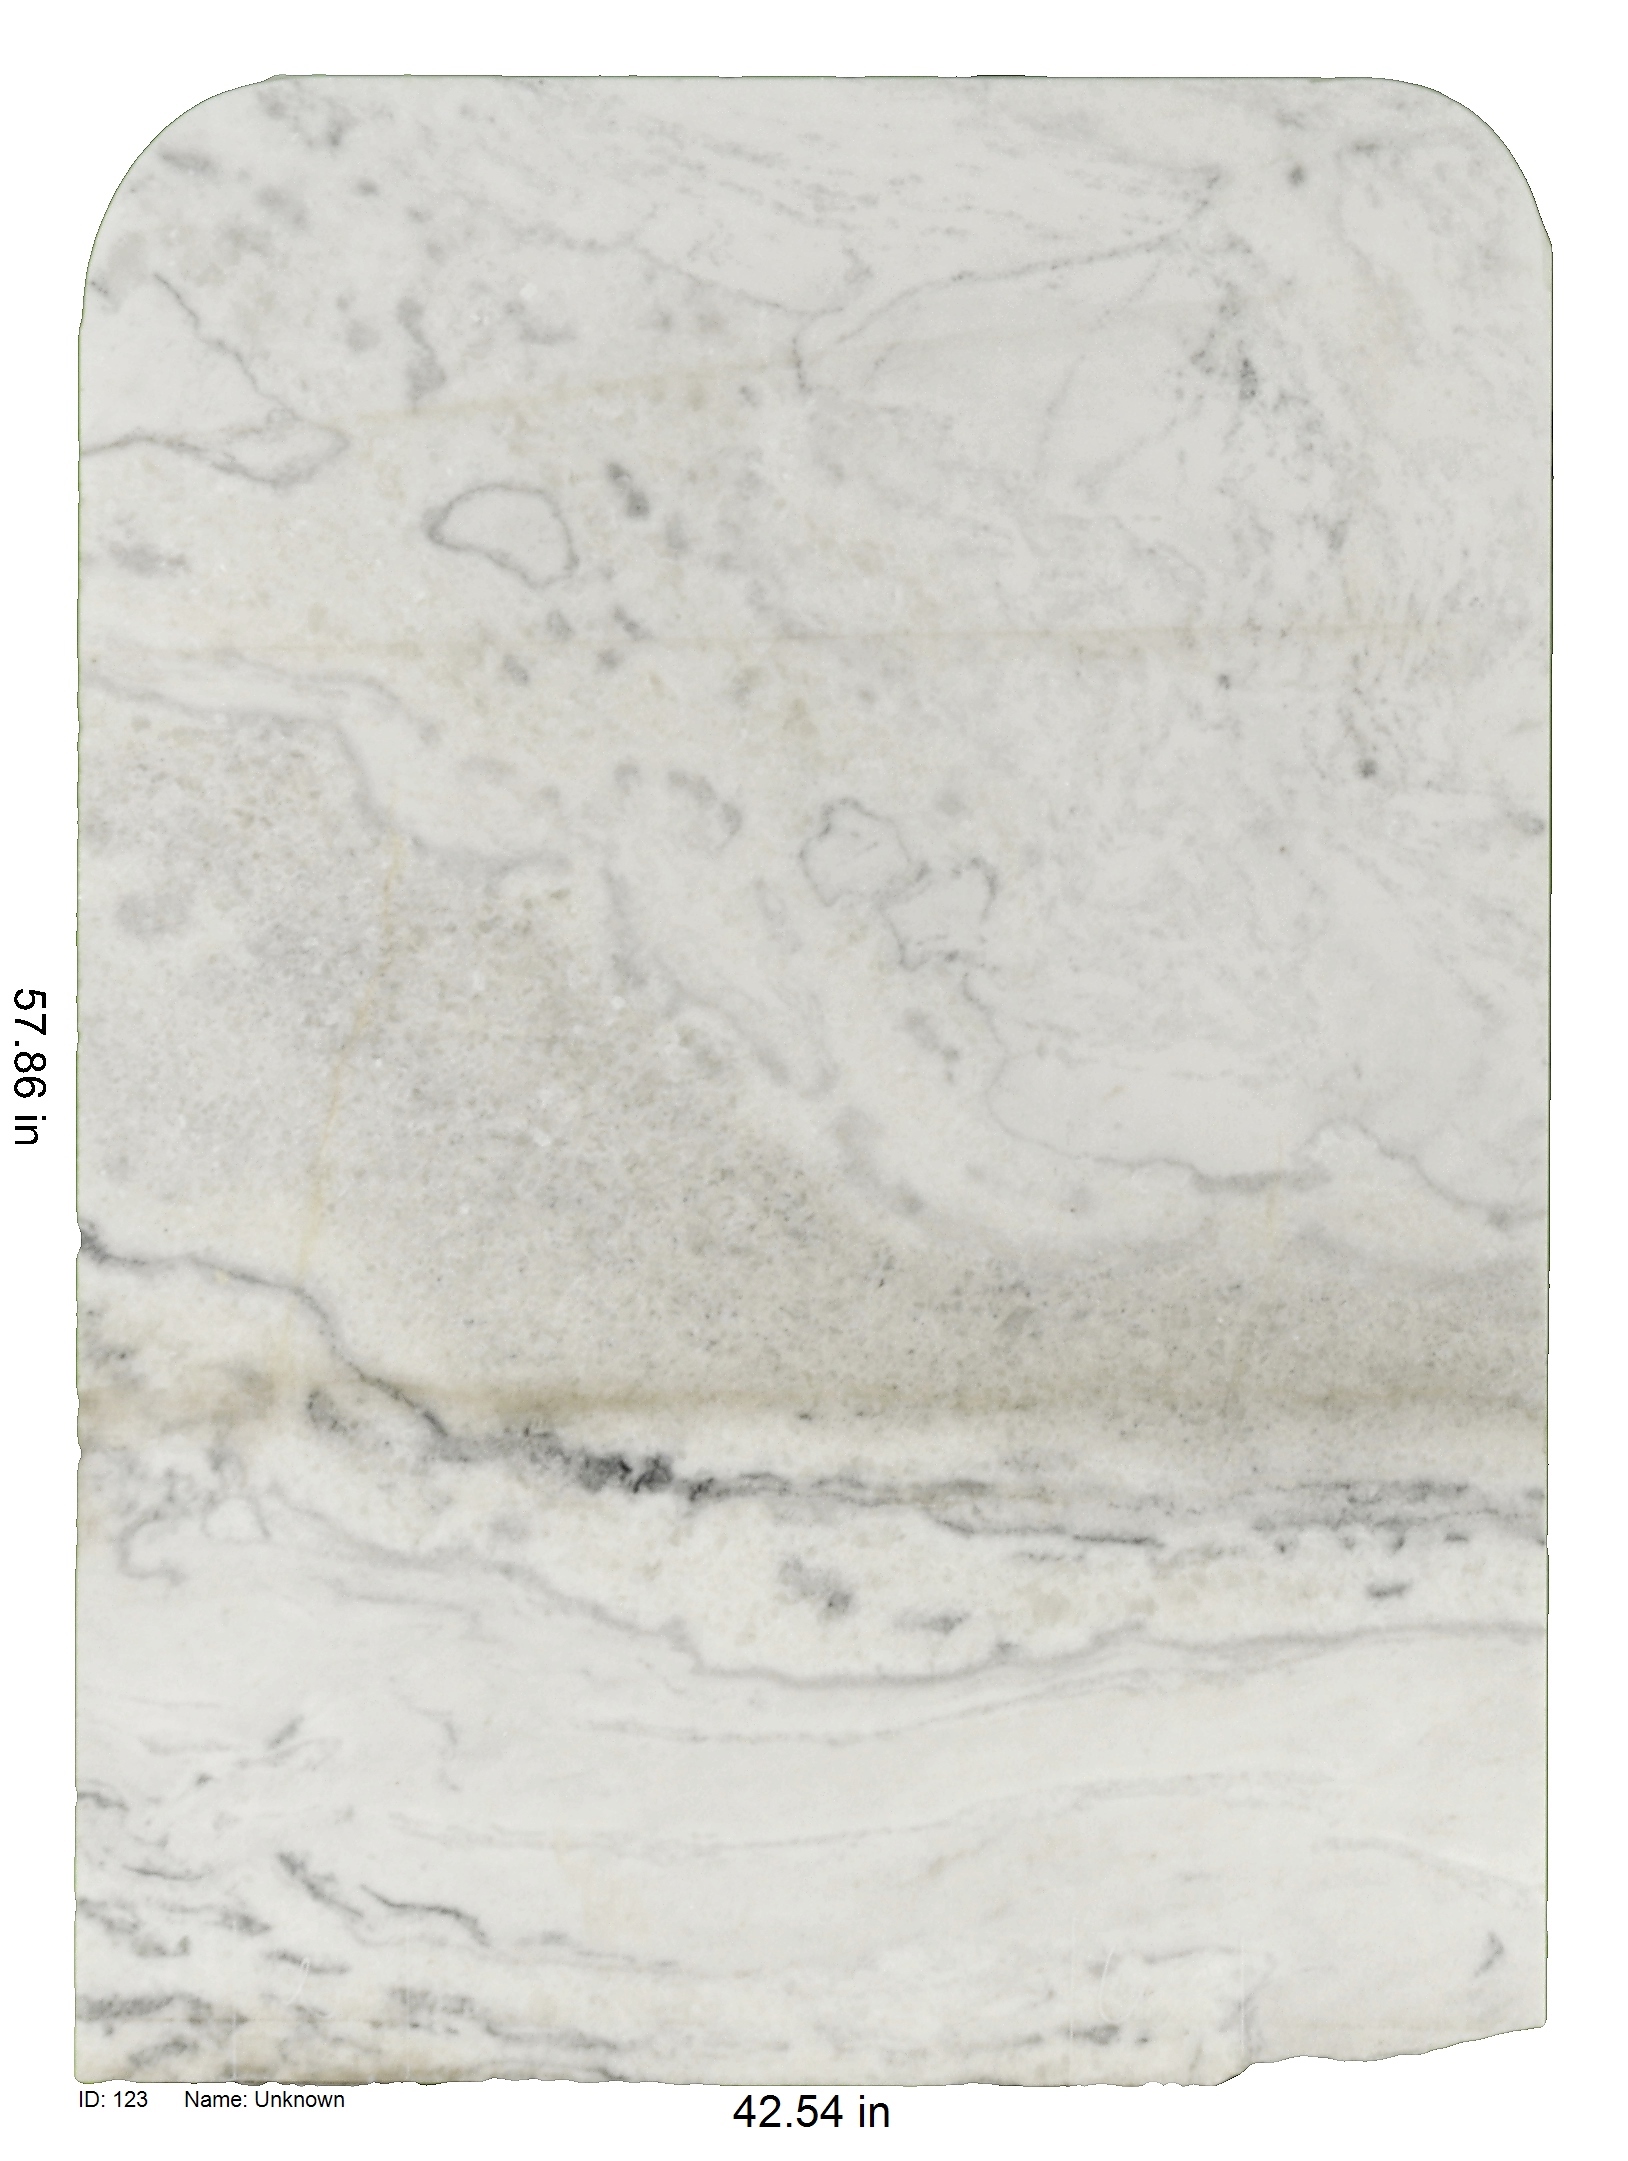 Off White Marble with Grey And Brown Veining<br />
ID: 123<br />
Name: Unknown<br />
Size: 57.86x42.54